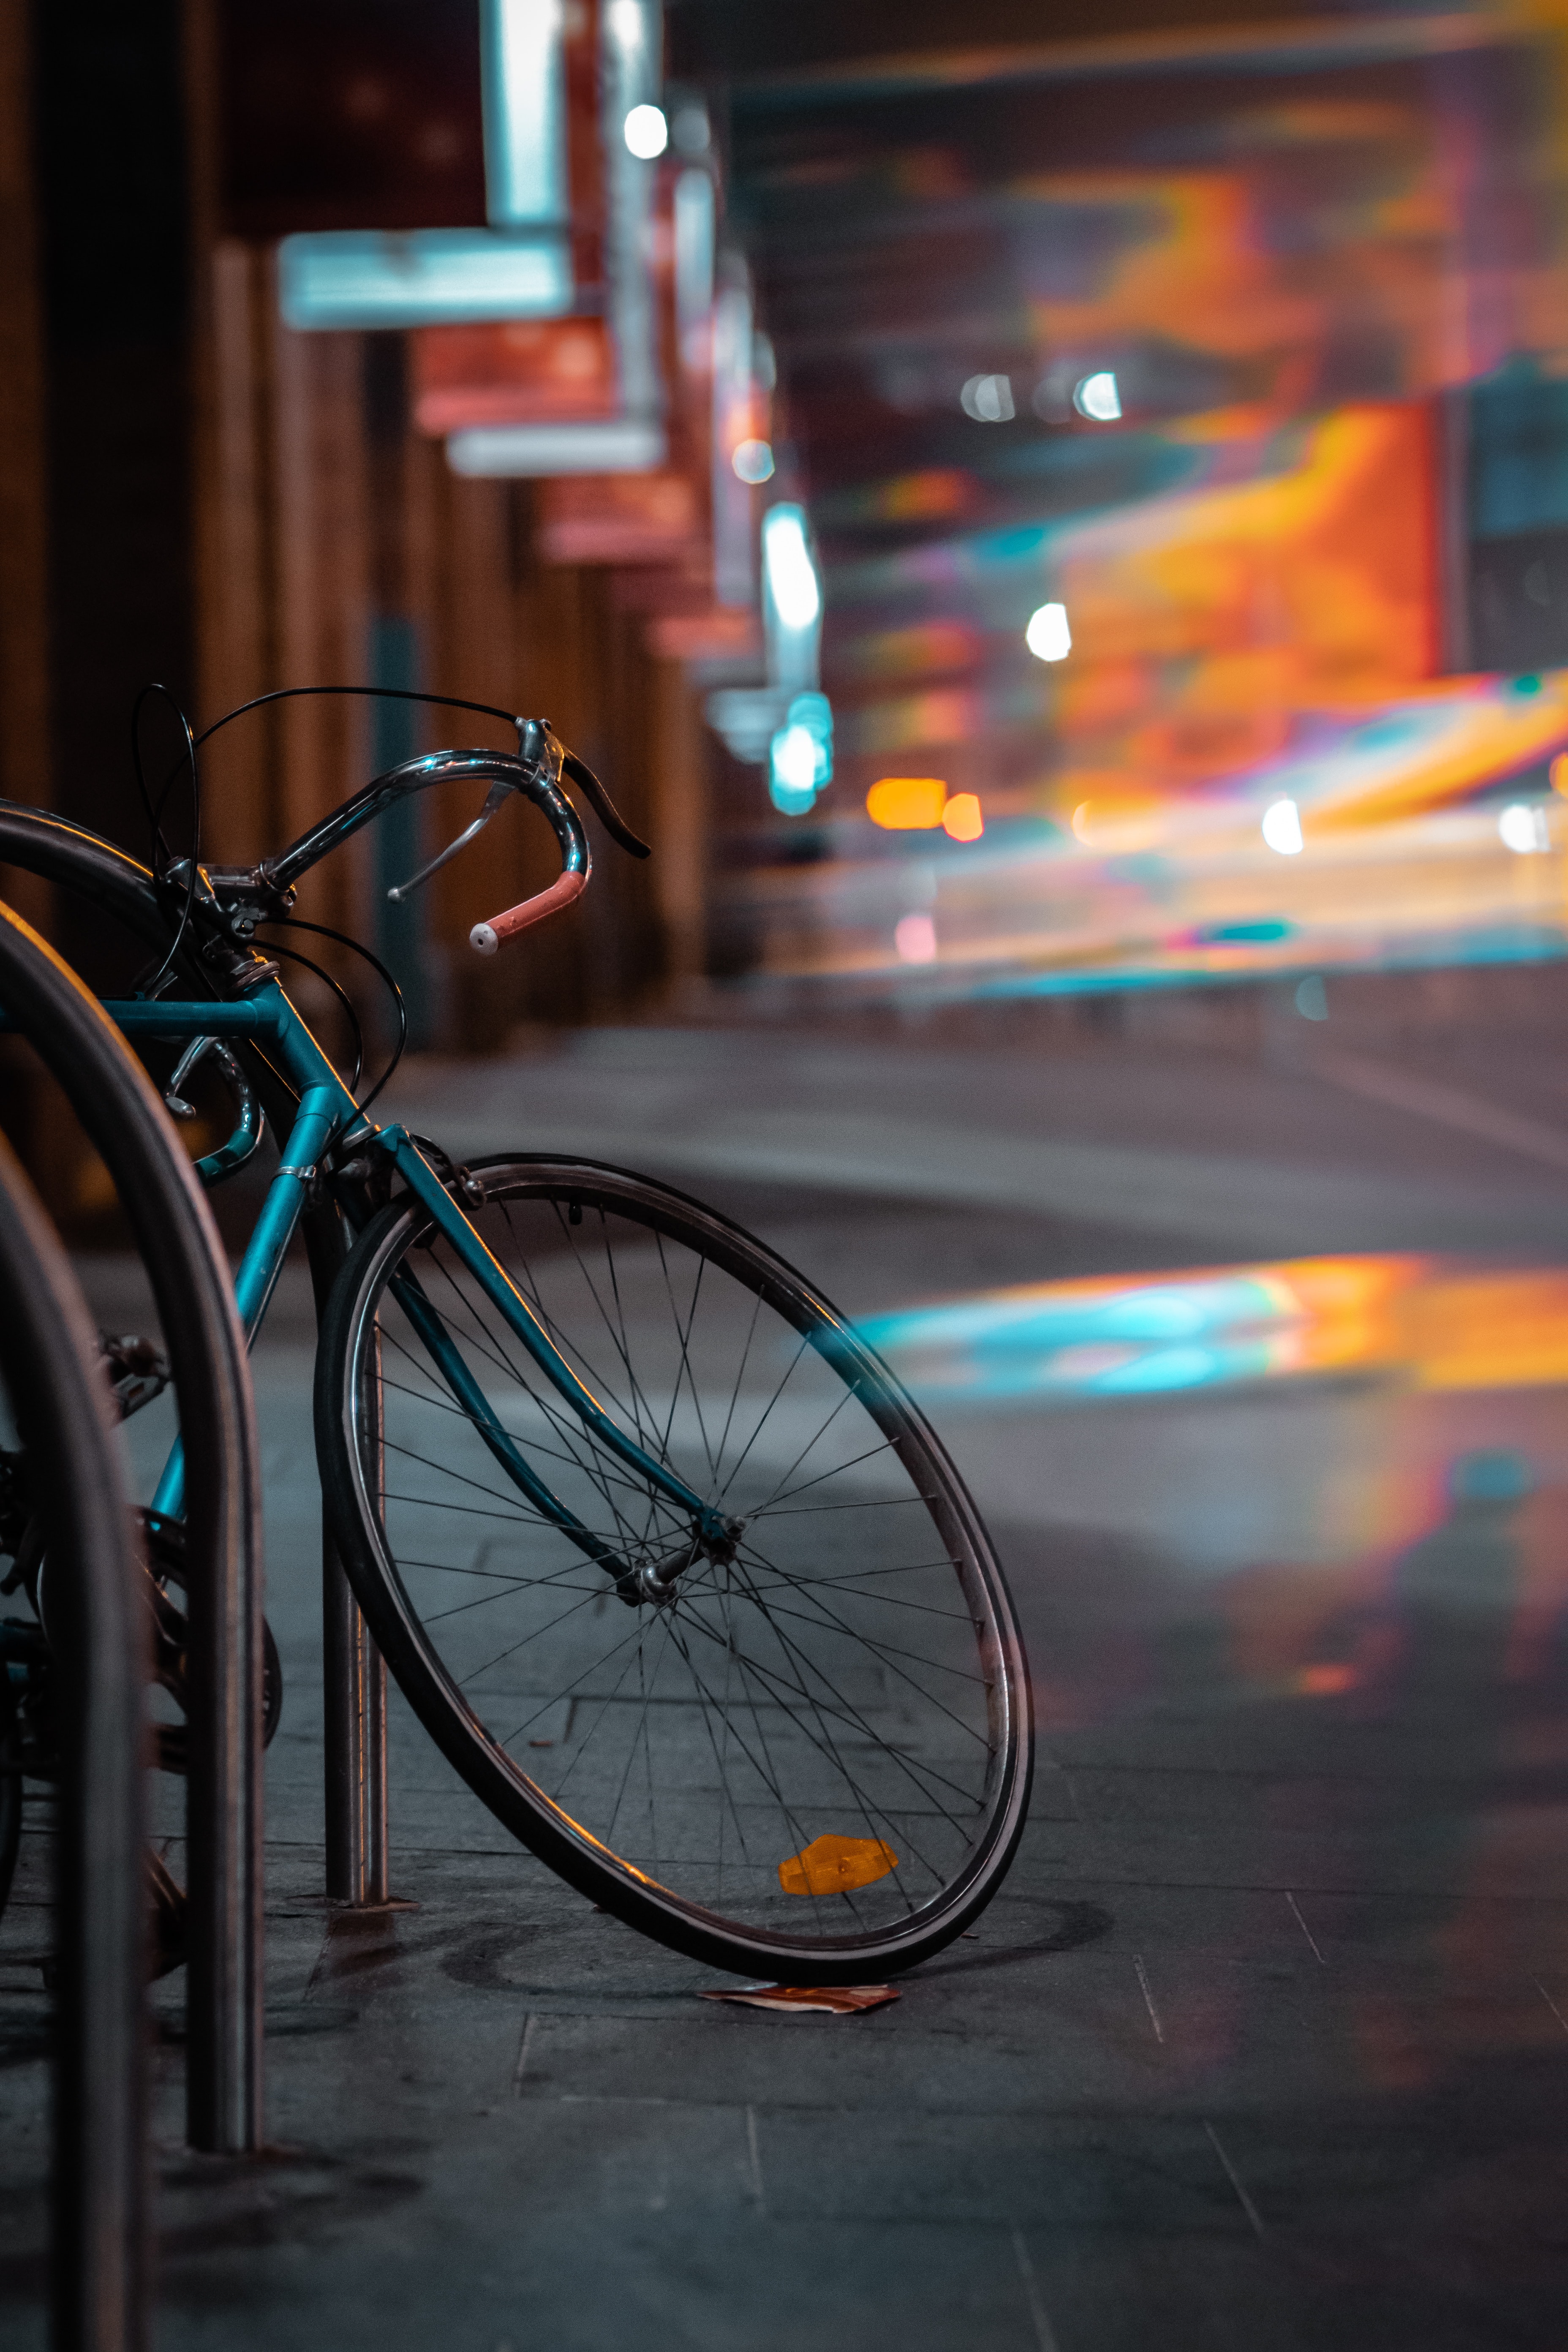 wheels, miscellaneous, smooth, blur, bicycle, miscellanea, glare, evening, transport